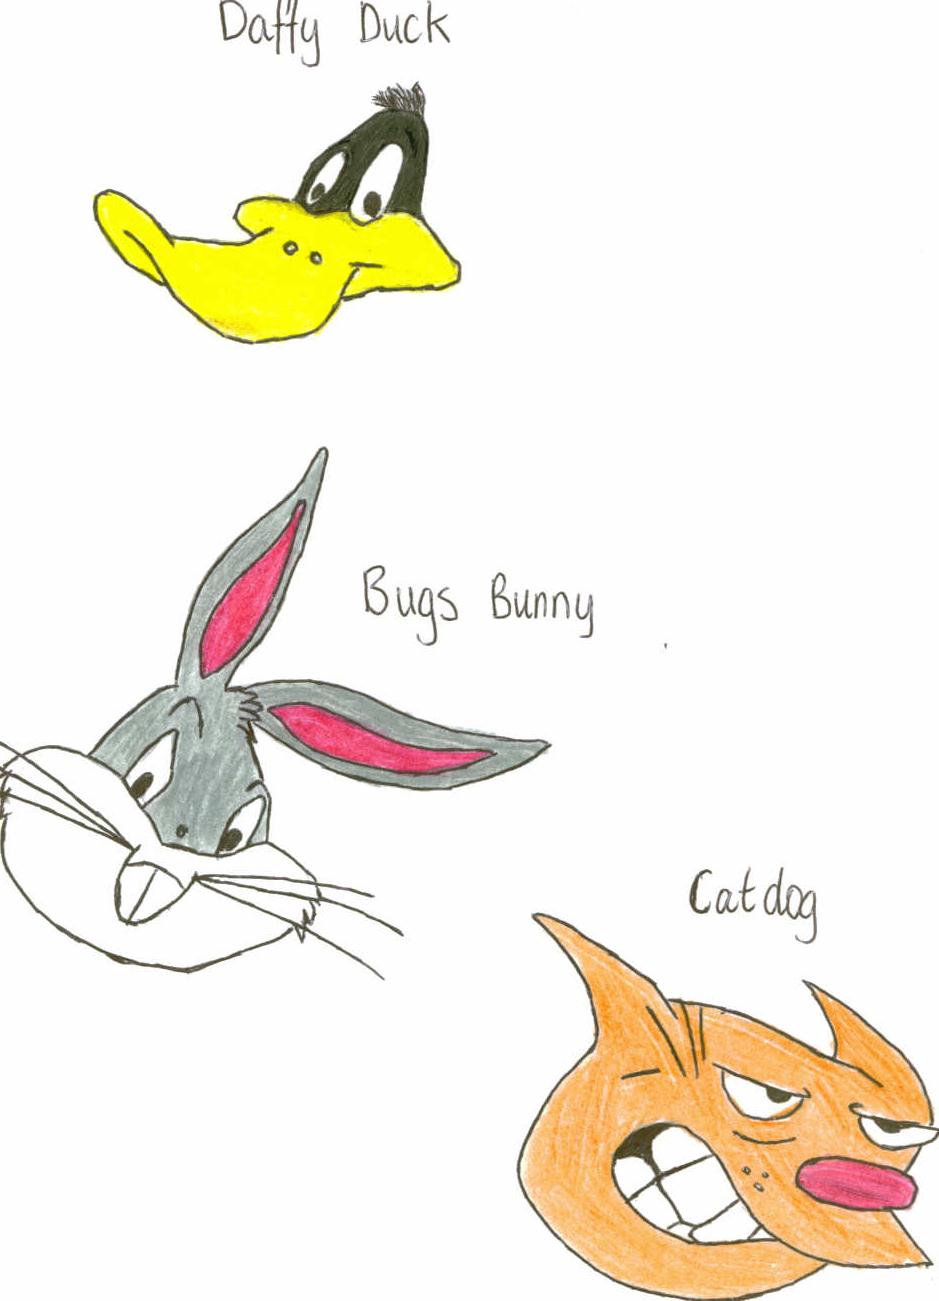 bugs bunny, daffy duck and catdog by taz_the_devil